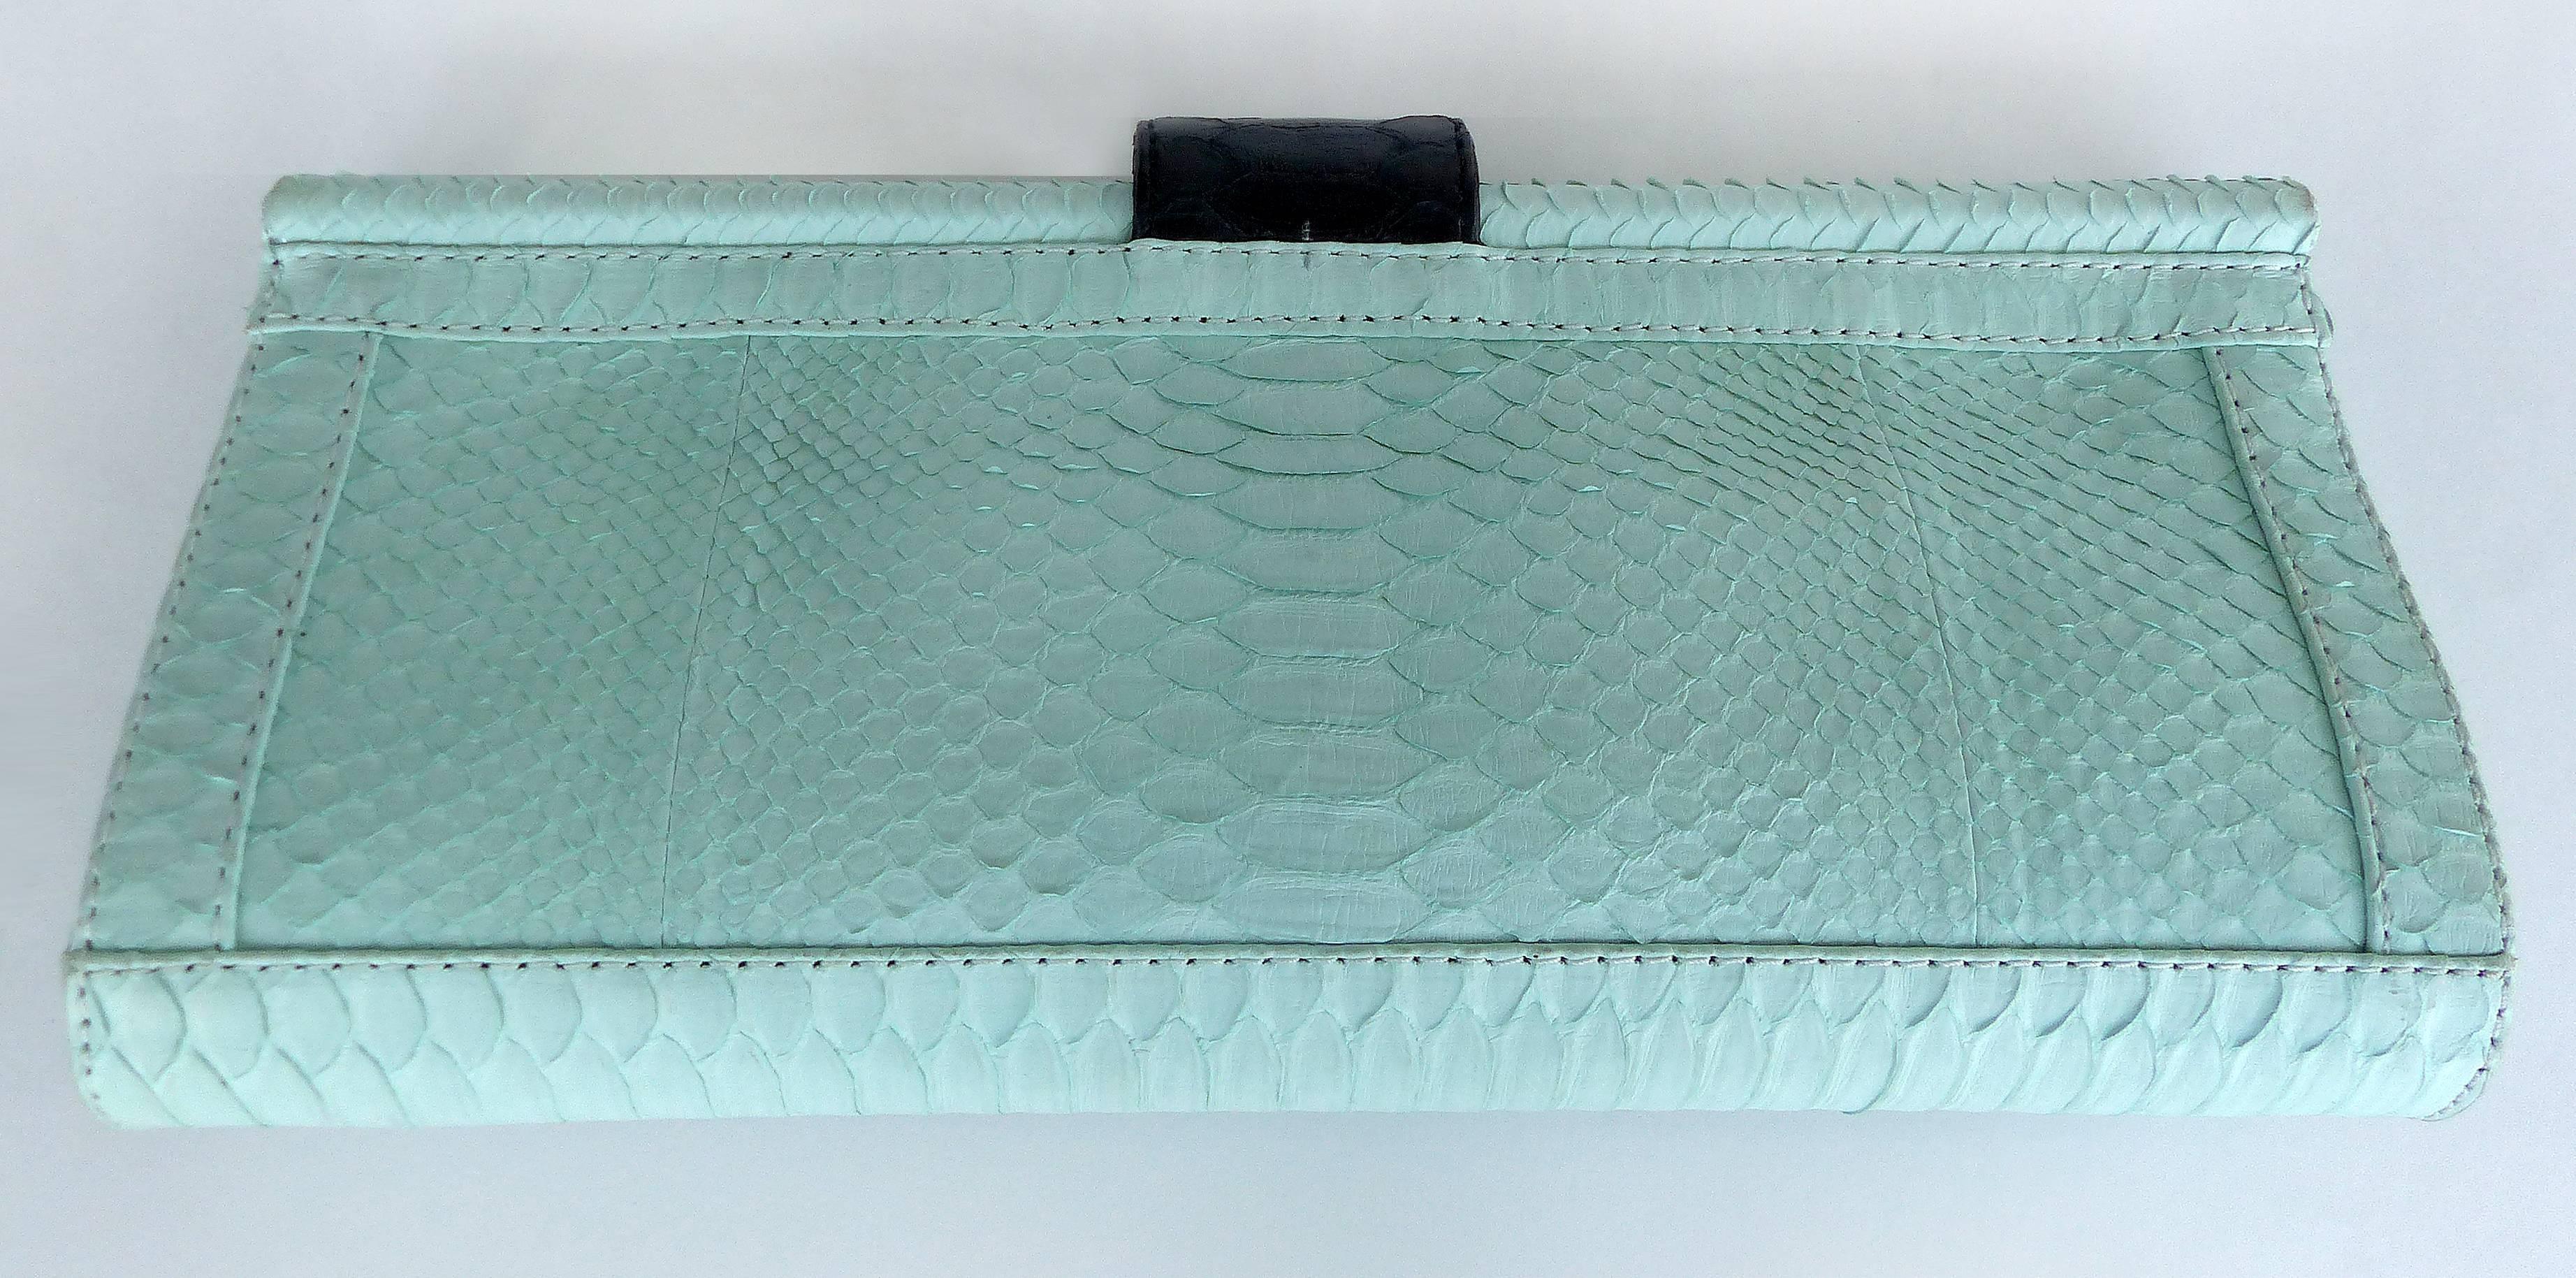 
Offered for sale is a large "Oscar" clutch with a hand-painted python front and mint colored python body. Designed in Bali by Glen Arthur for GaBag Co., this larger clutch opens to reveal a zippered interior pocket and ultrasuede lining.